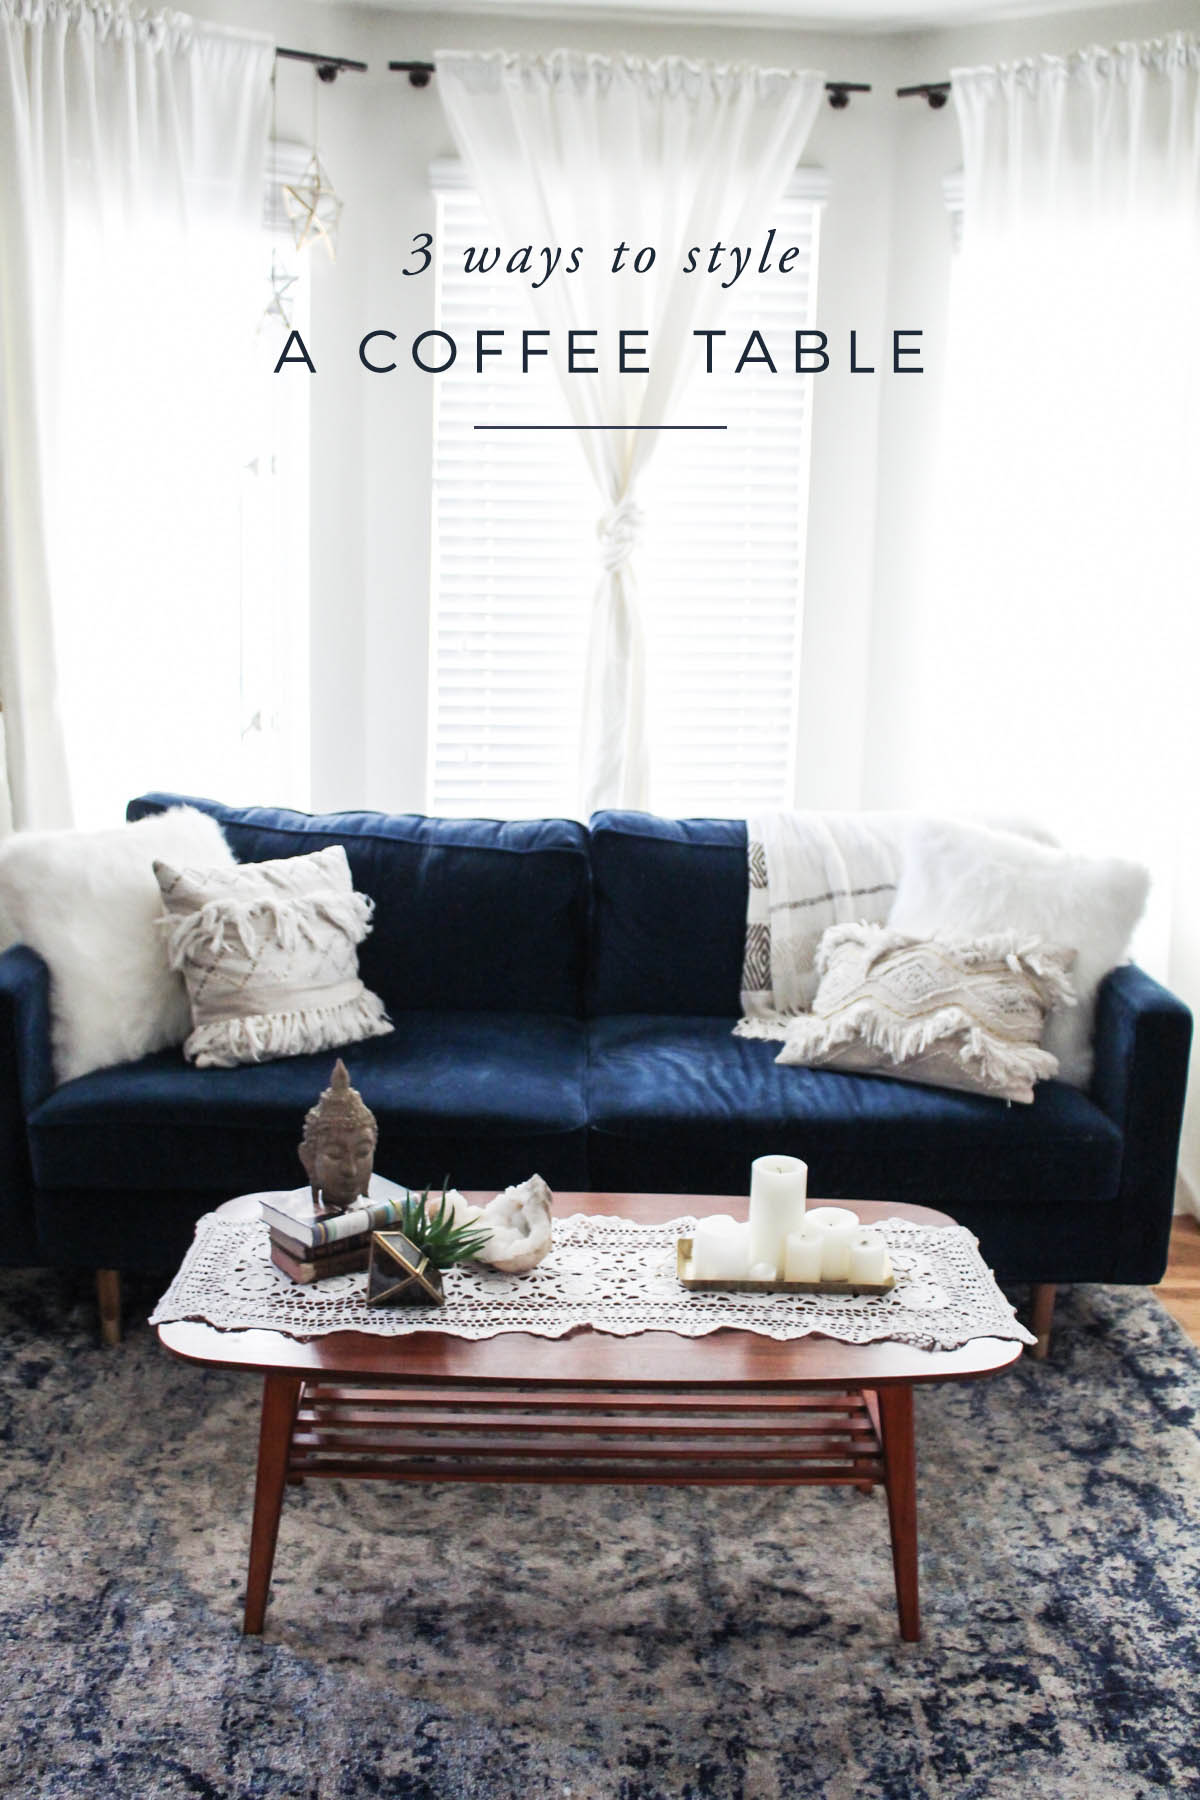 3 ways to style a coffee table